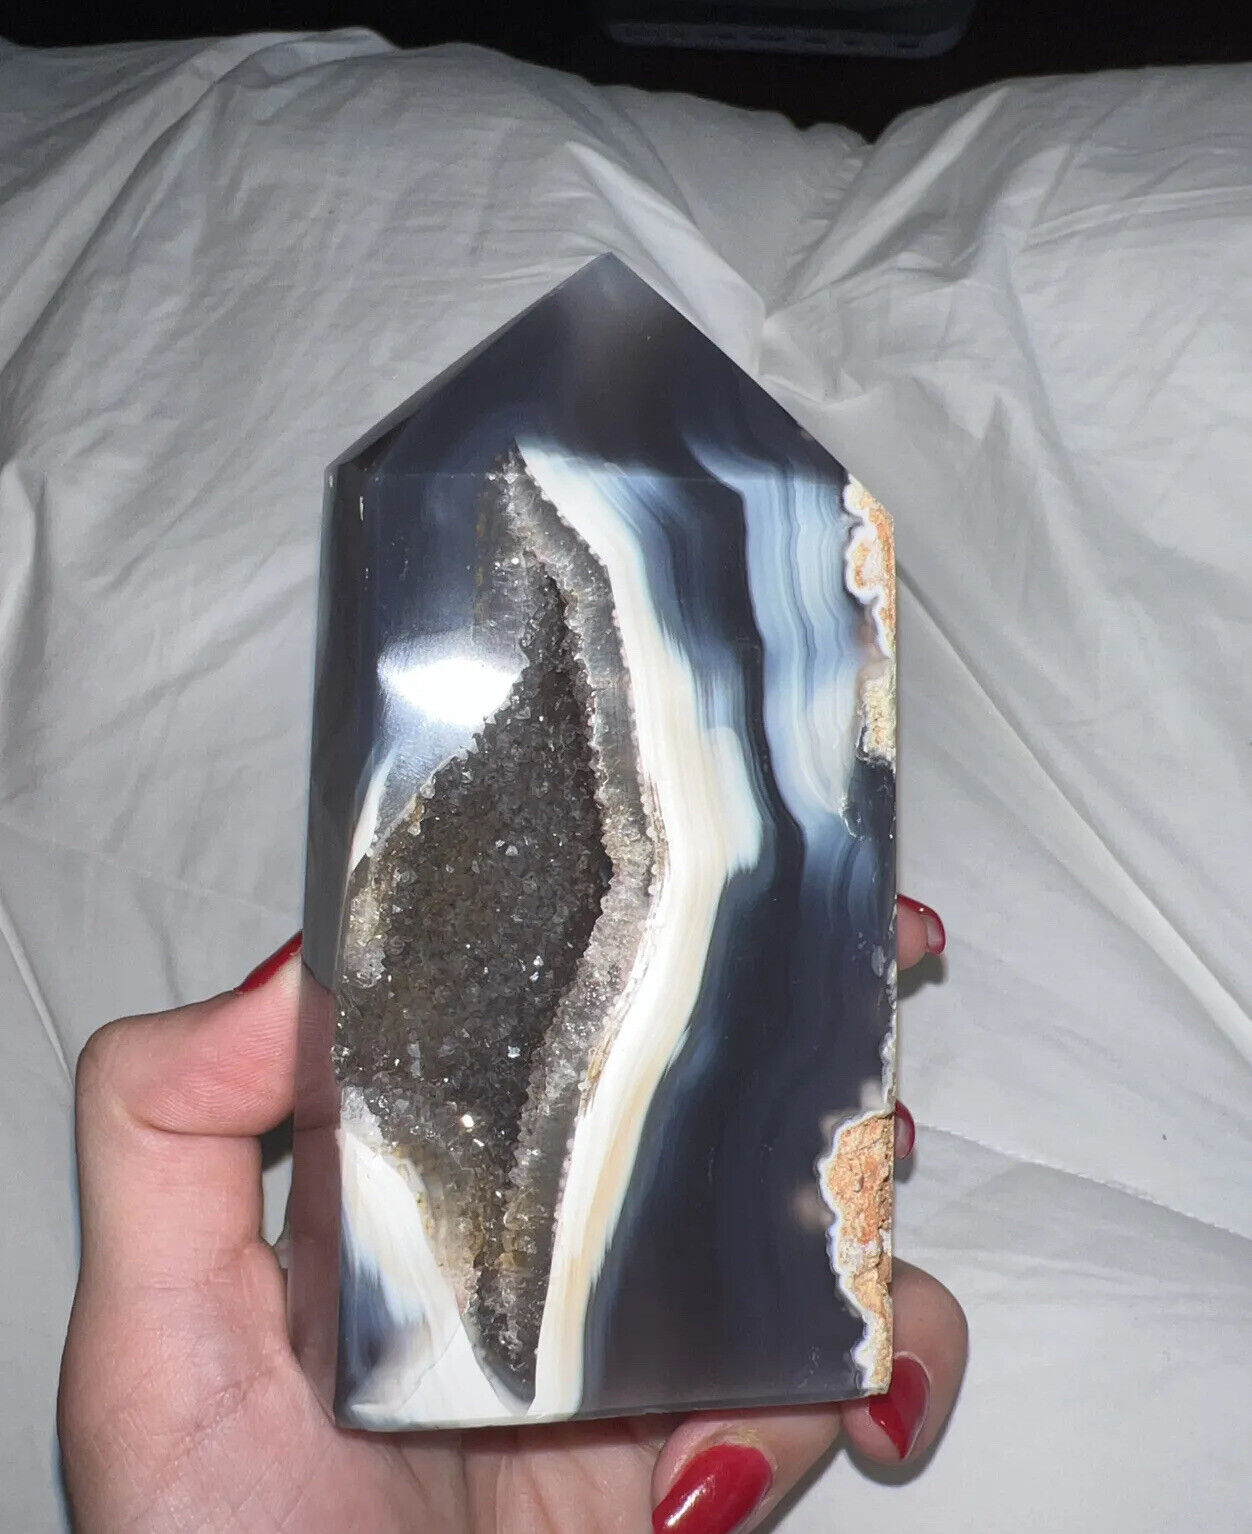 Druzy Agate Tower 5x3 inches 1.9 pounds